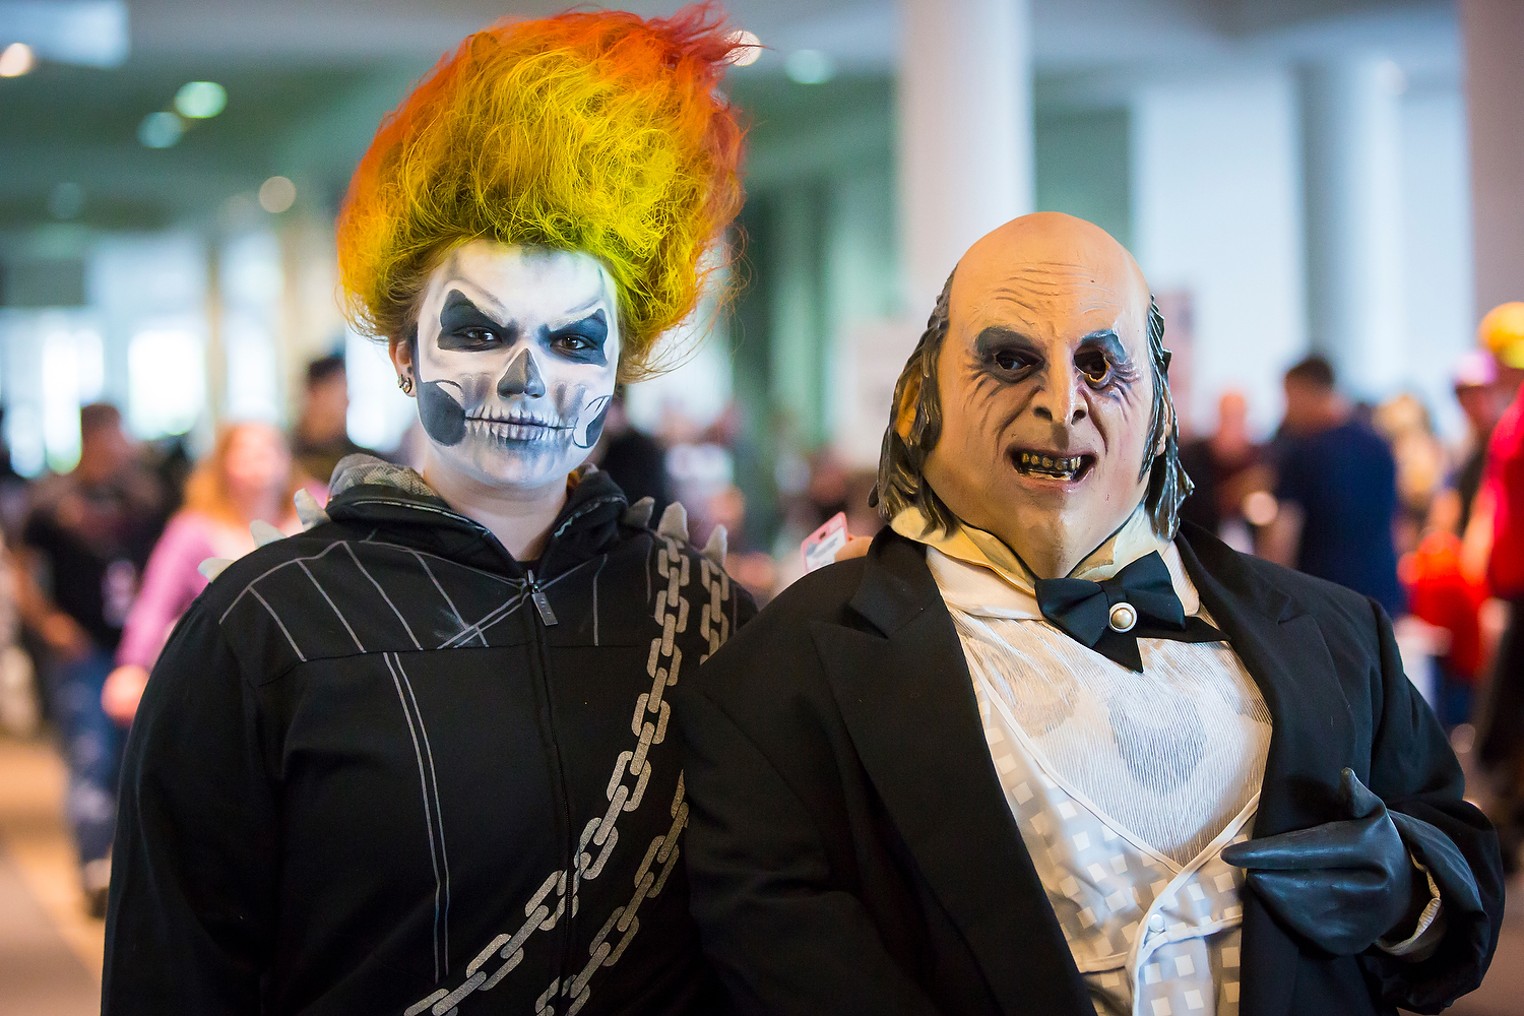 The Best Cosplay At The 2015 New Orleans Wizard World Comic Con